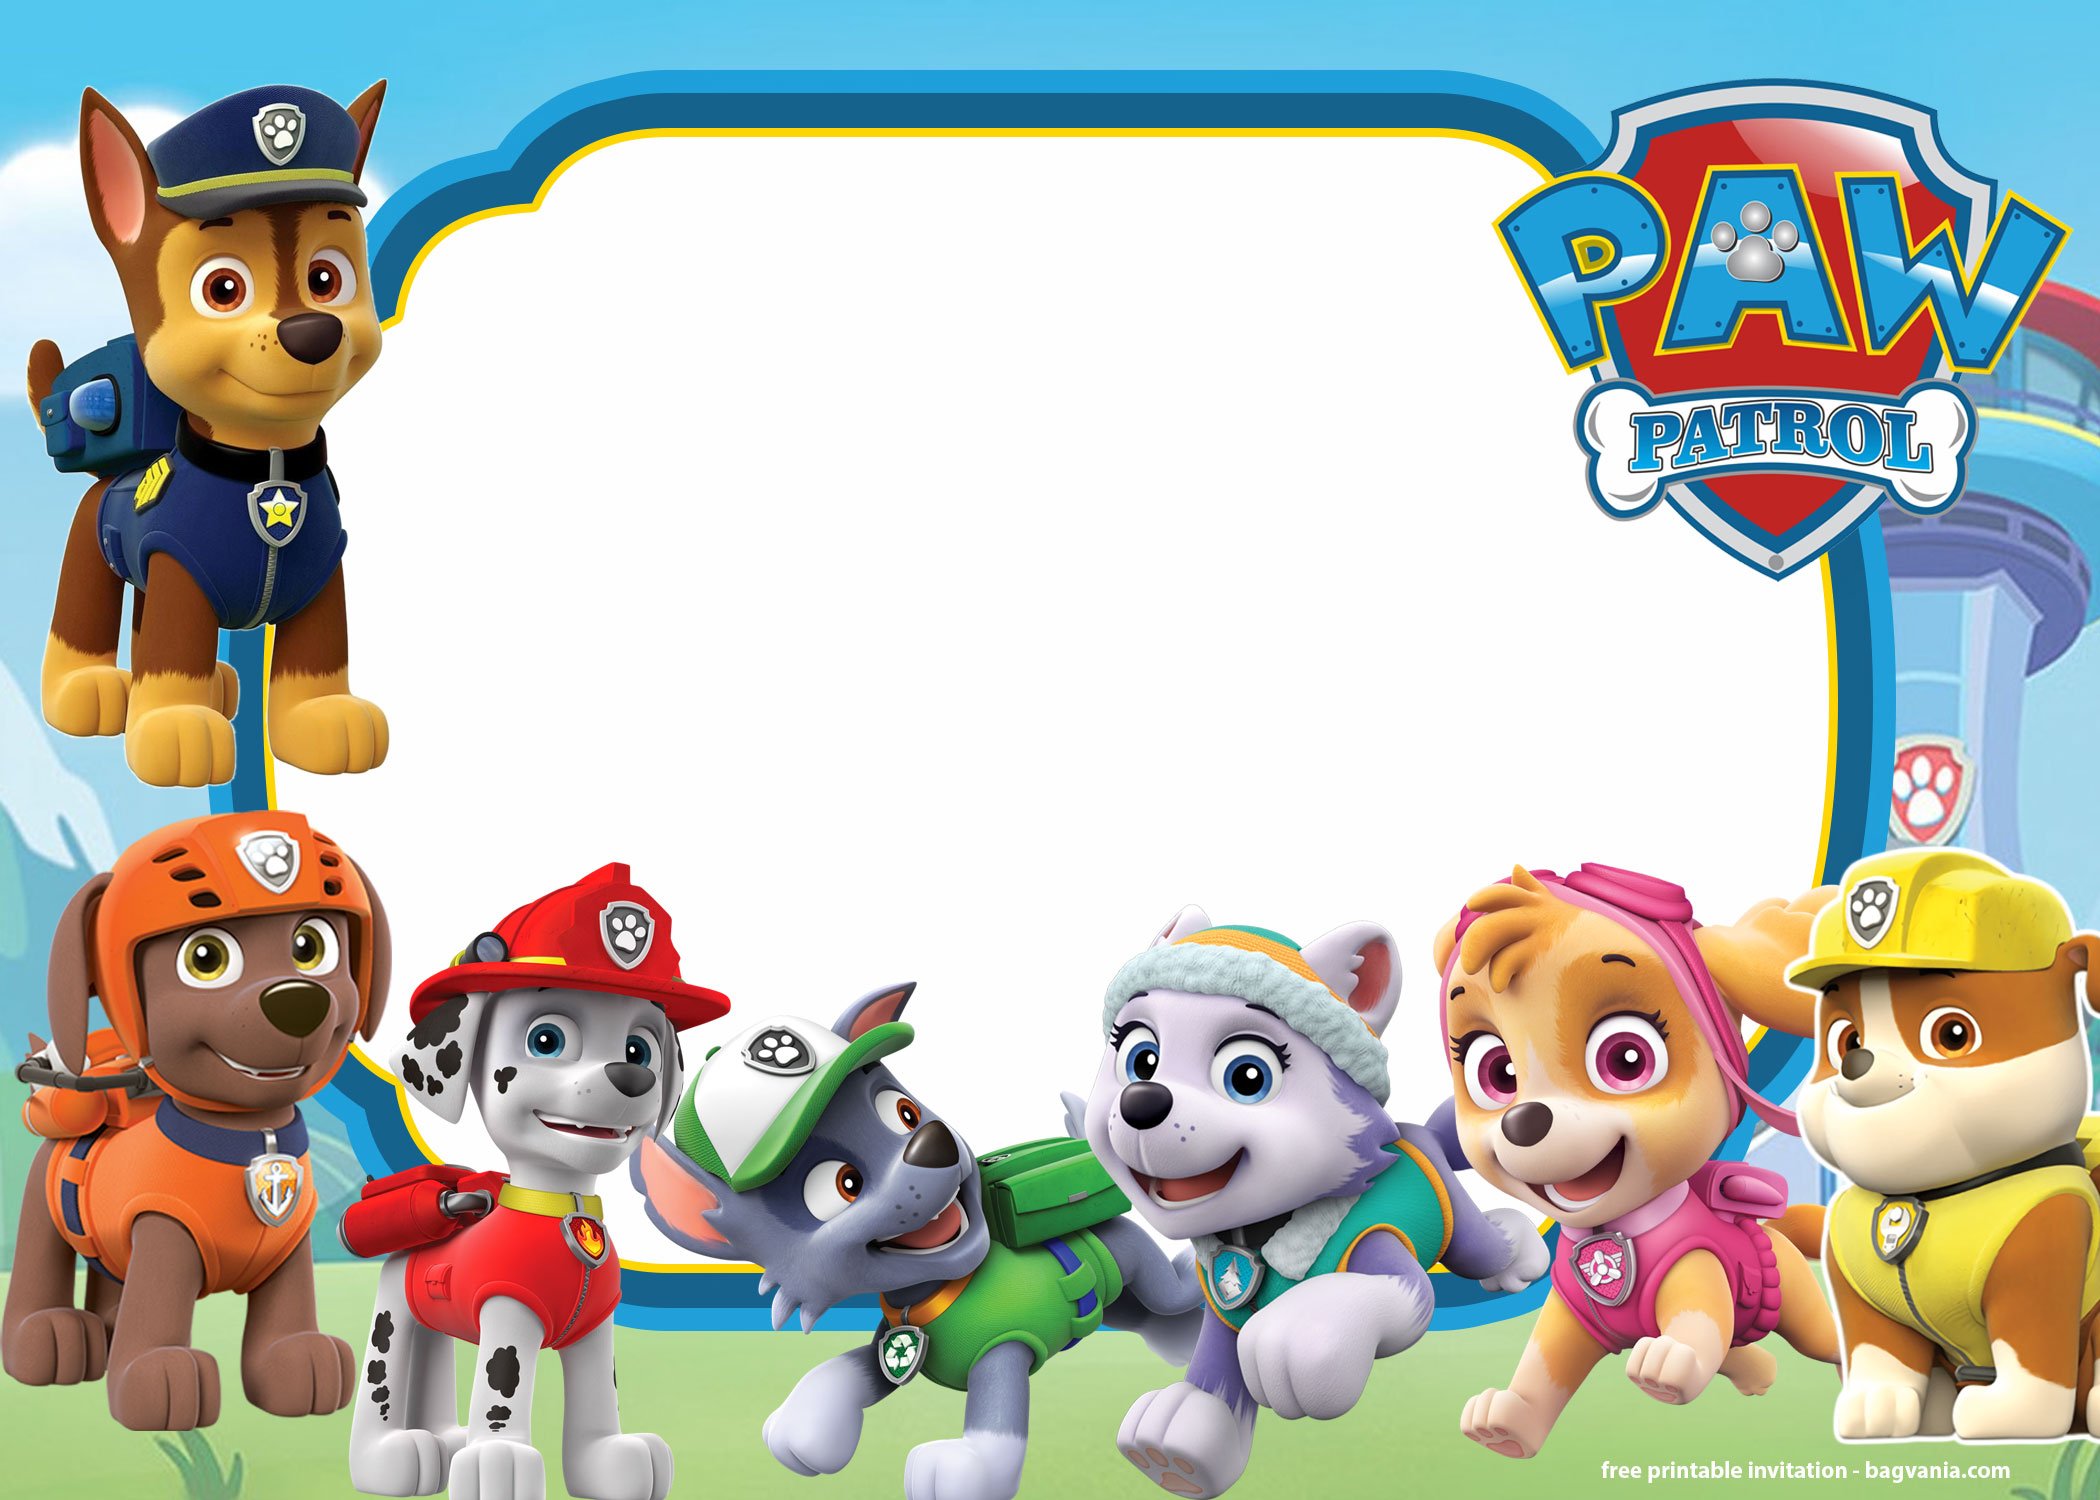 FREE Printable Paw Patrol Invitation Templates Lookout Version Download Hundreds FREE